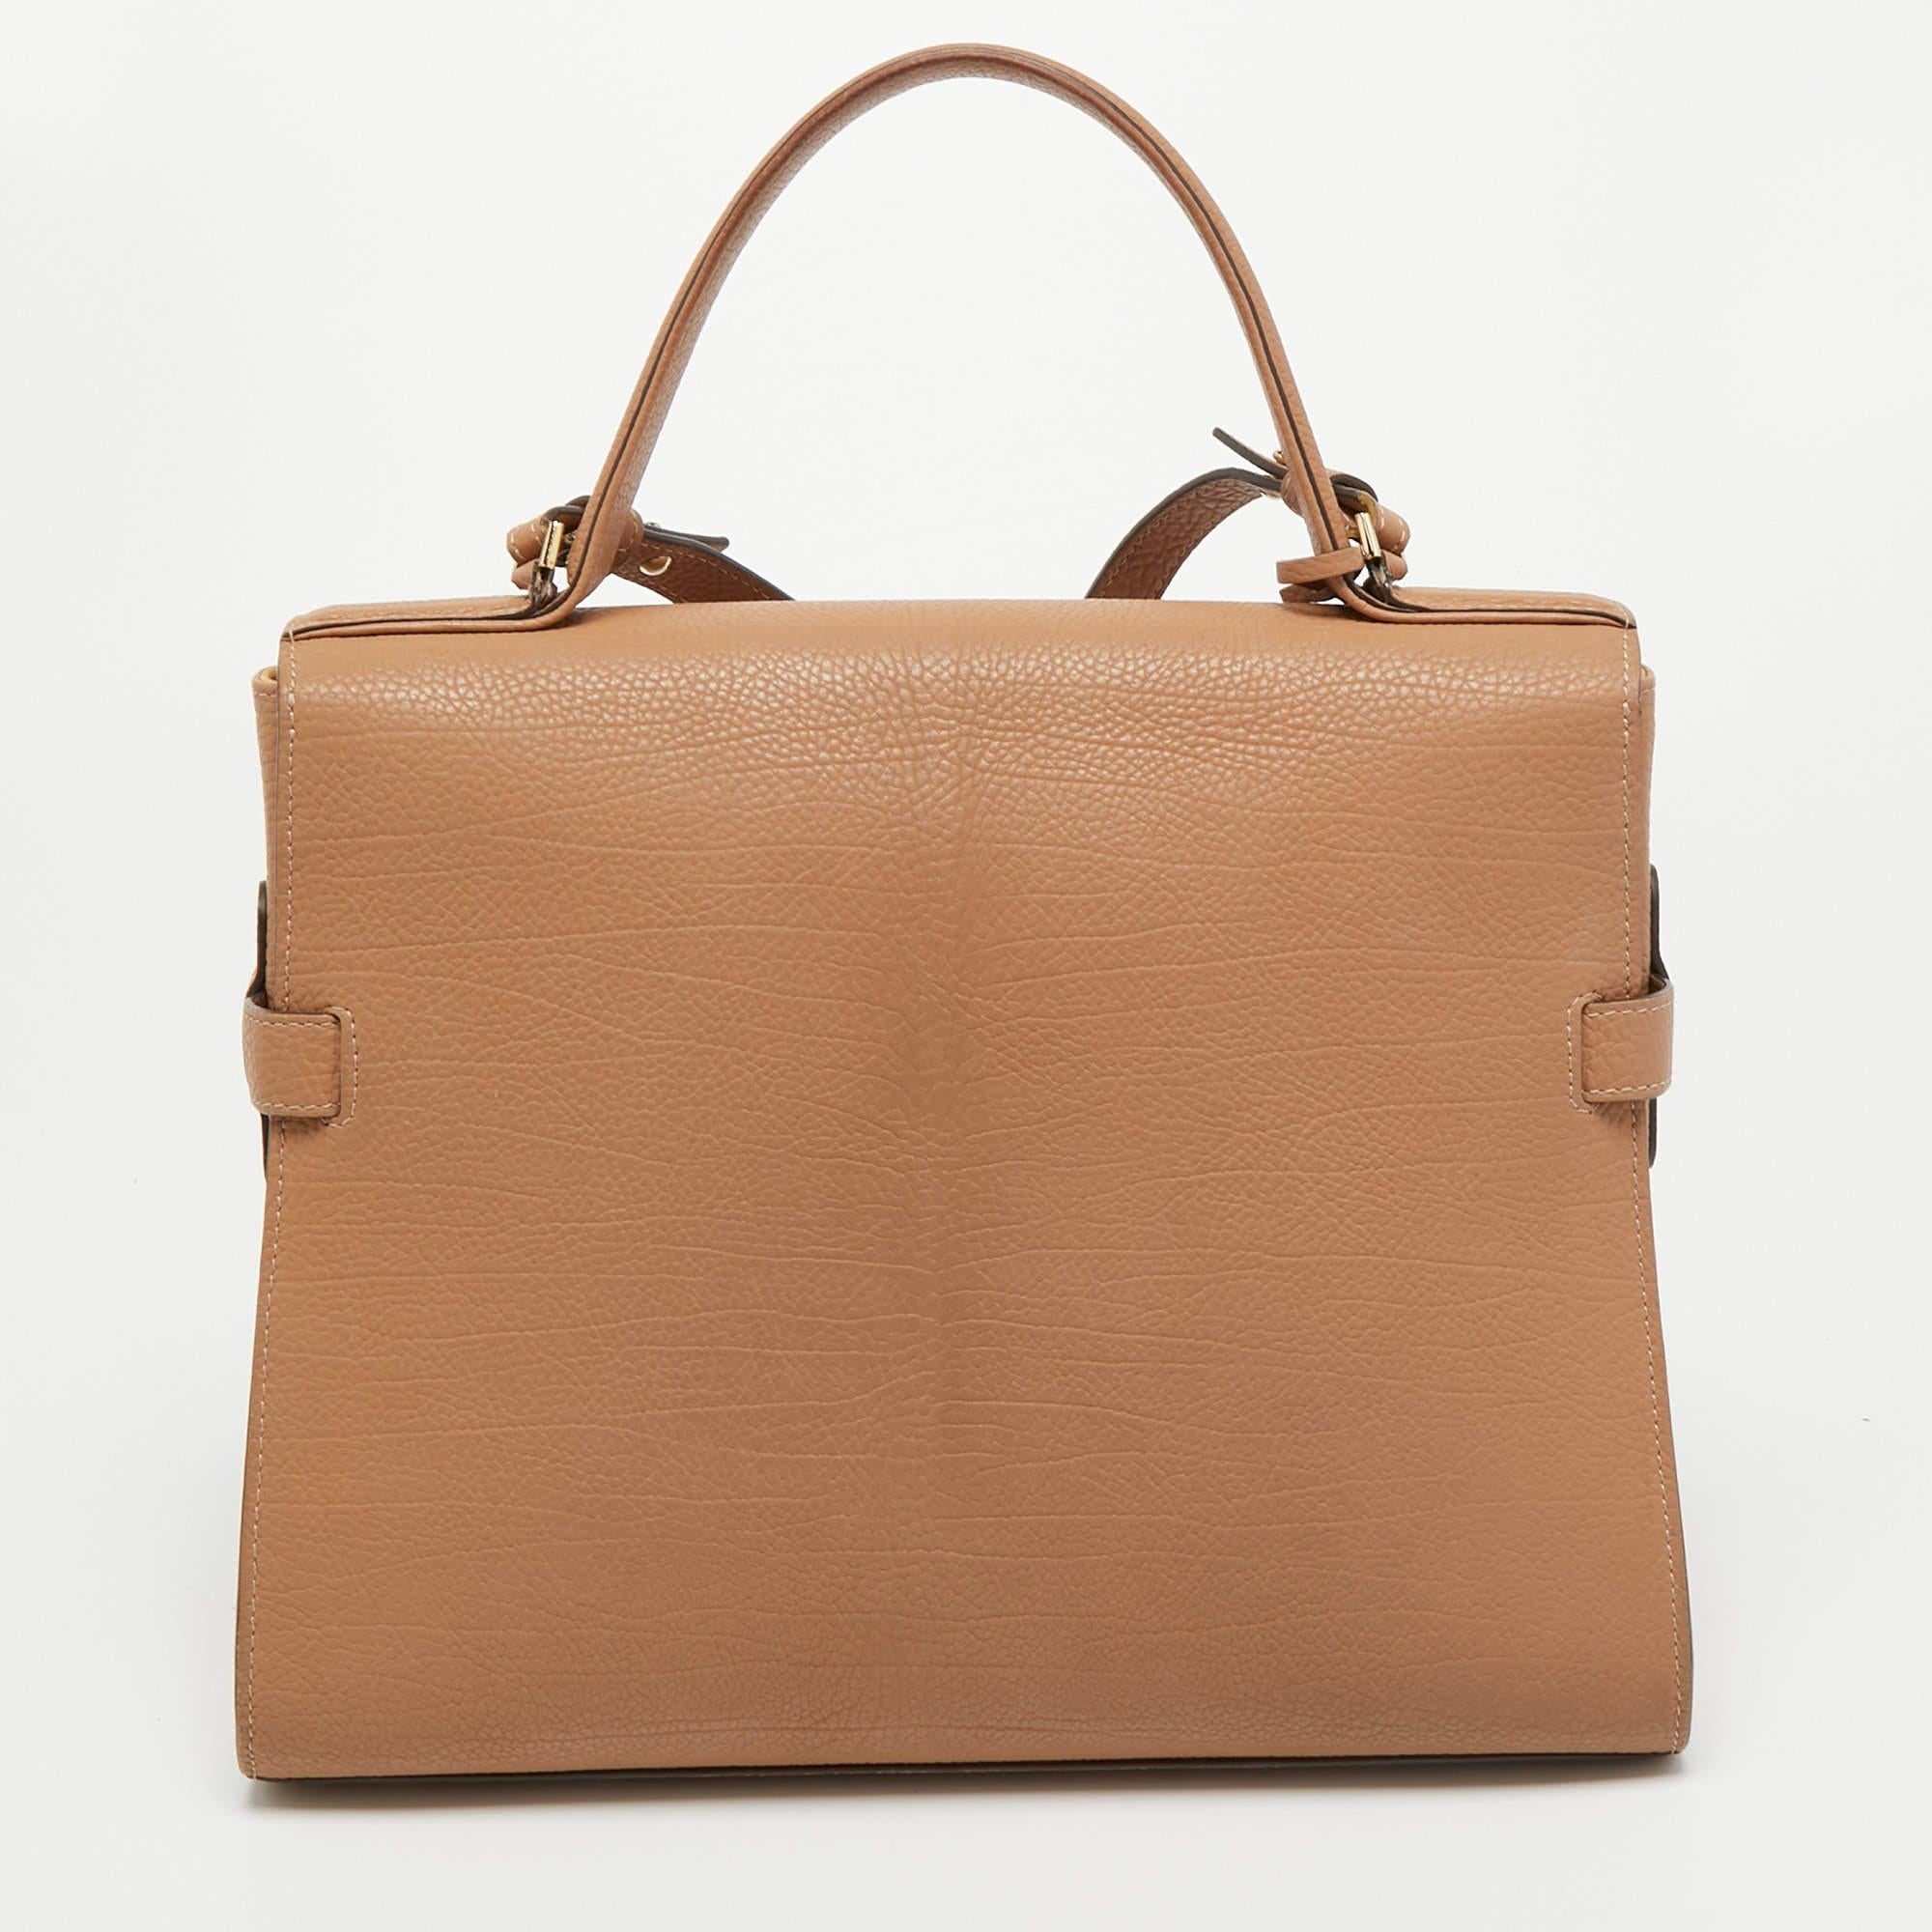 This handbag by Delvaux has a structured silhouette and elaborate interiors to create a classically chic look. This alluring and beautifully fashioned leather bag is surely a must-have. It is held by a top handle and crafted to